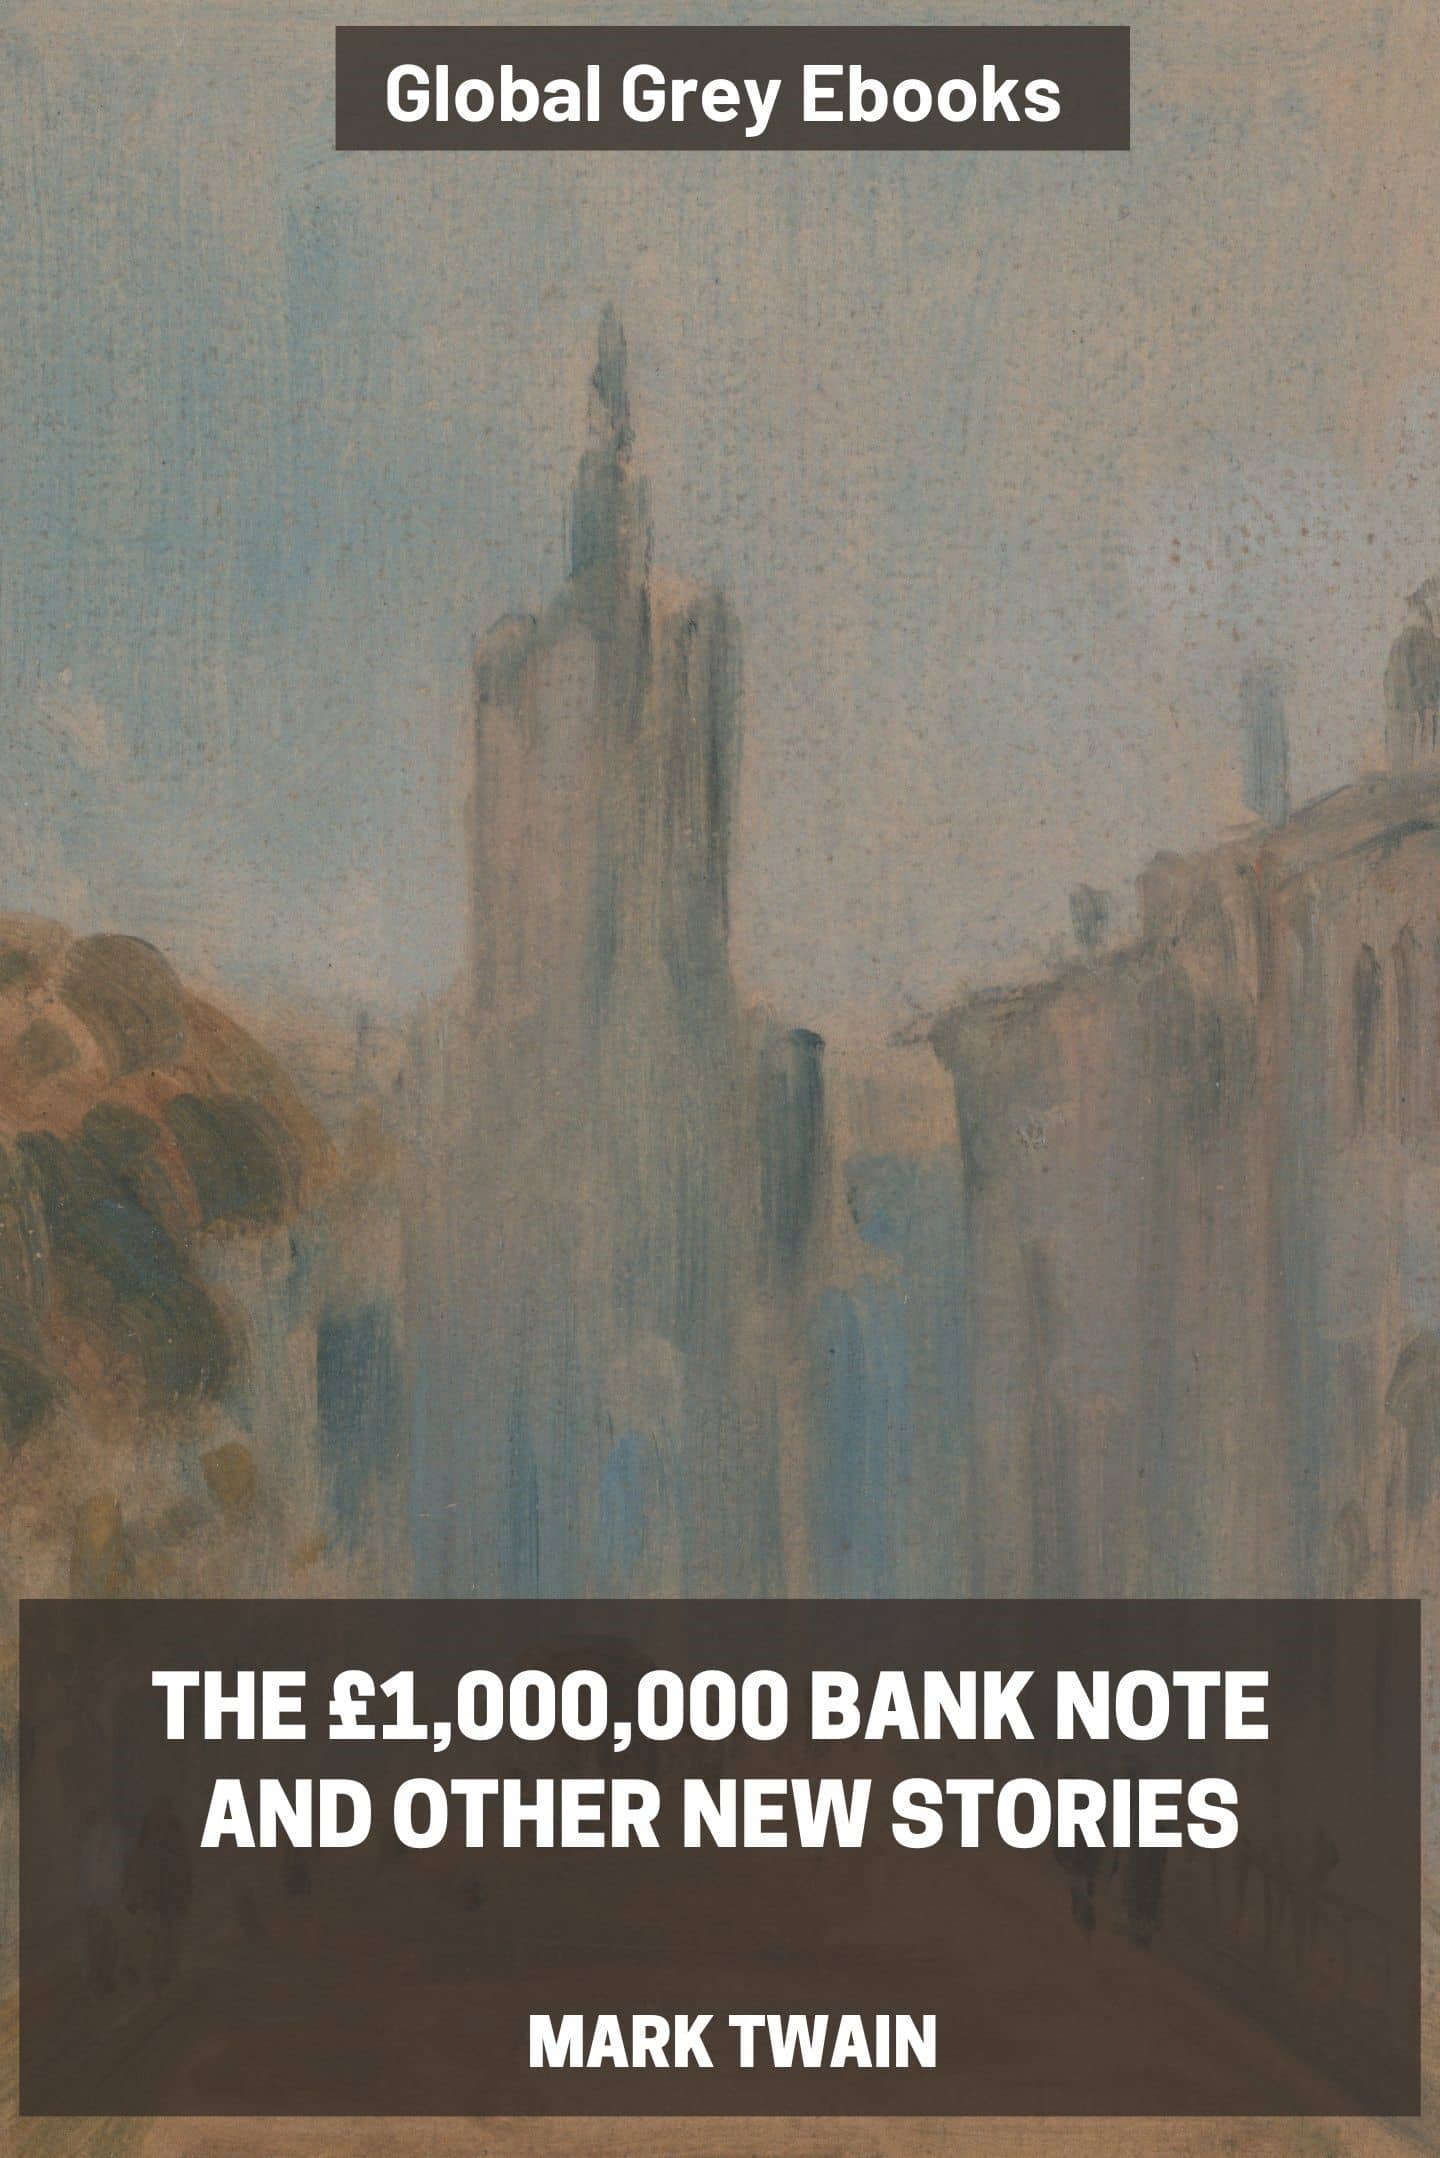 The £1,000,000 Bank Note and Other New Stories, by Mark Twain - Complete text online